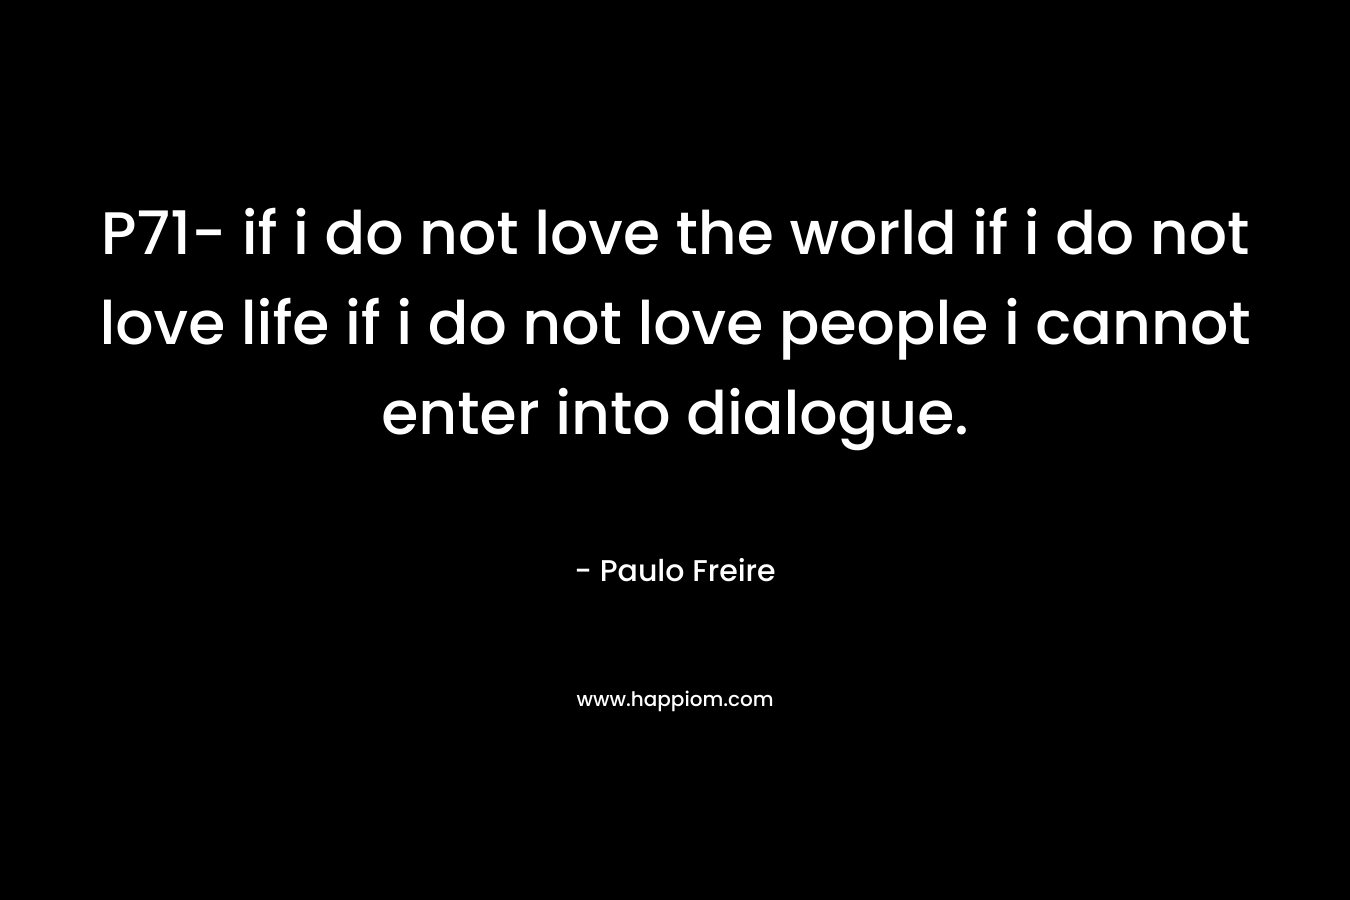 P71- if i do not love the world if i do not love life if i do not love people i cannot enter into dialogue. – Paulo Freire